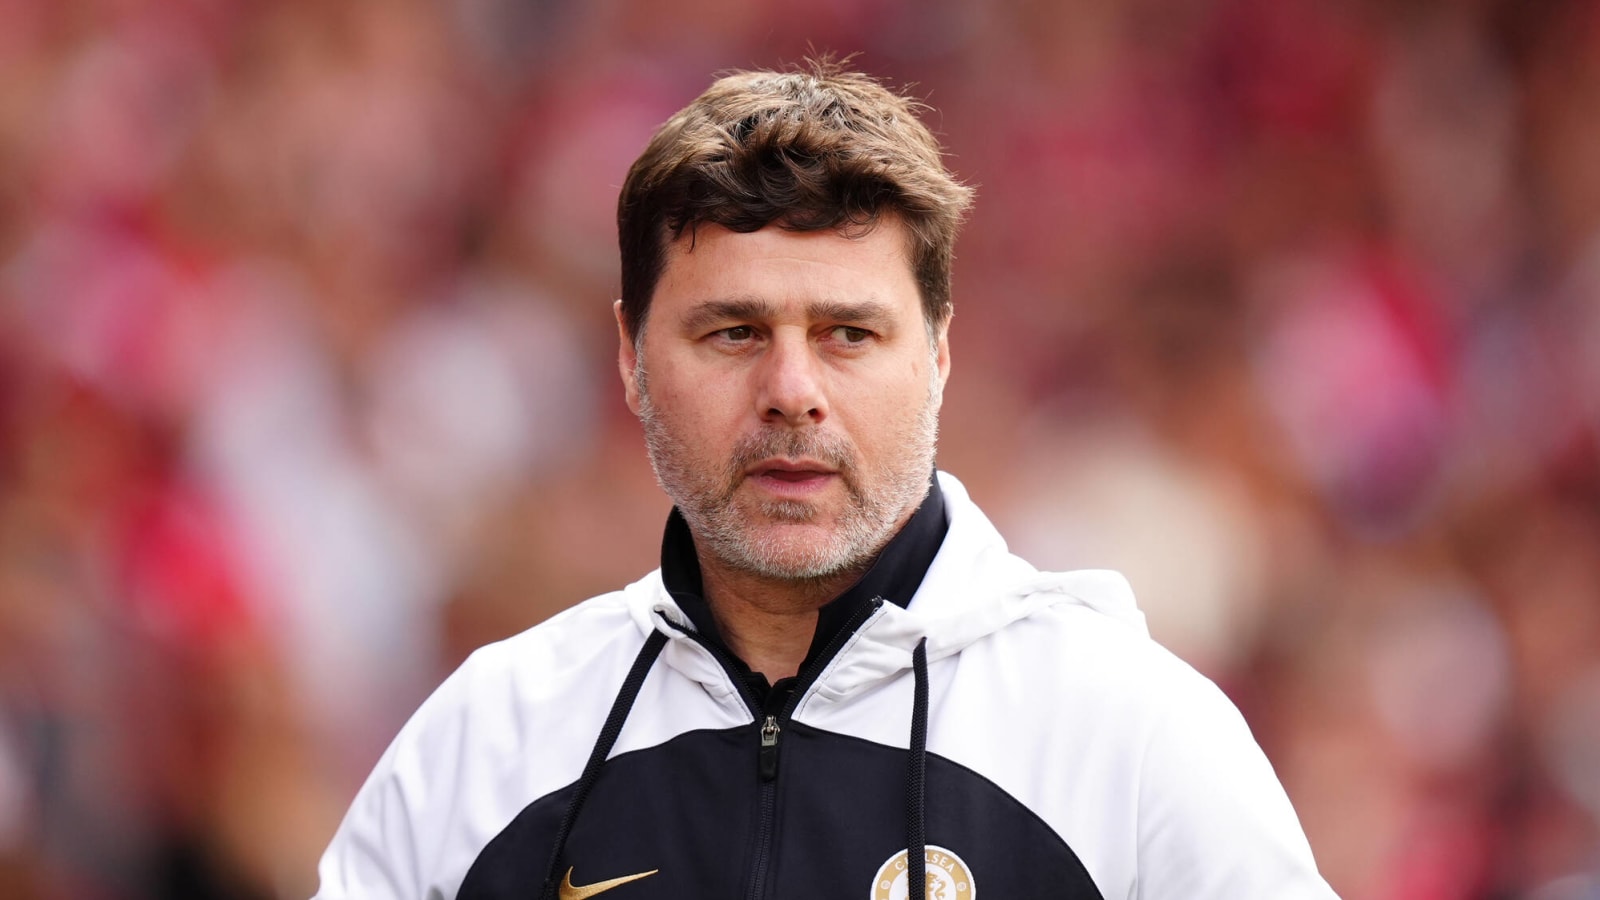 'Players want to leave' – Mauricio Pochettino speaks on Chelsea’s transfer plans